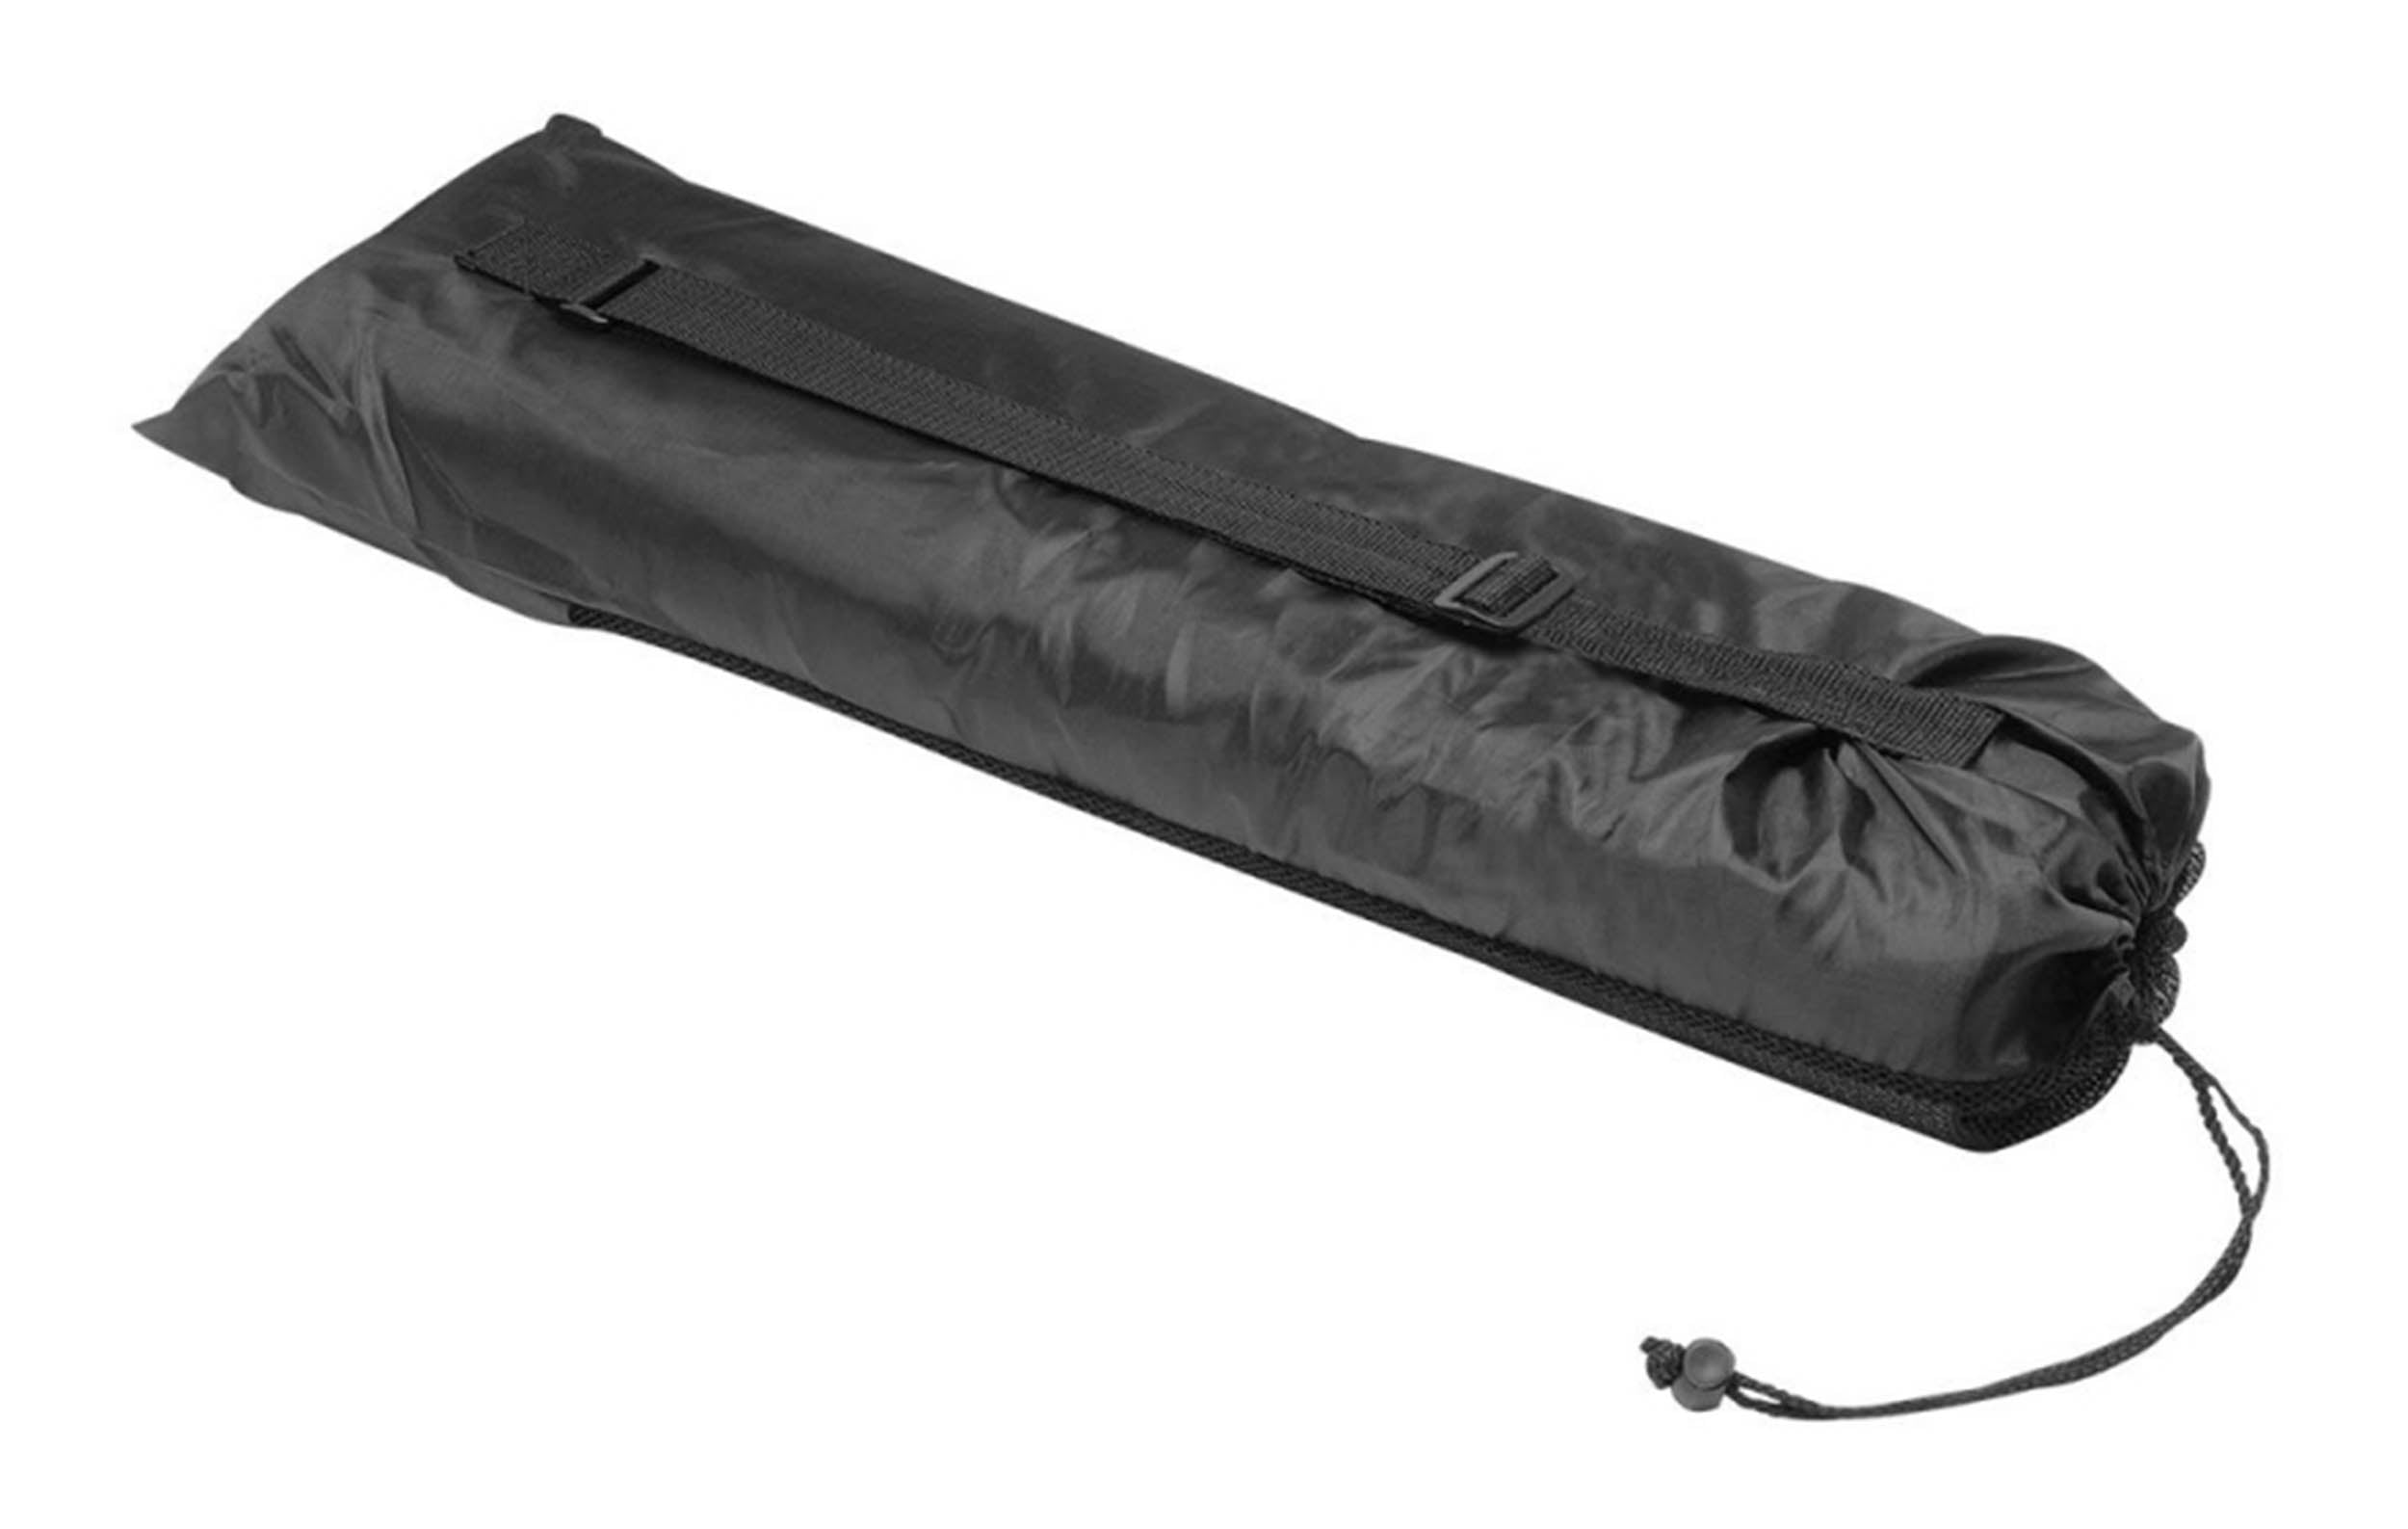 Onstage DMA4450, 4 x 4-Ft Nonslip Drum Mat with Carrying Bag On-Stage